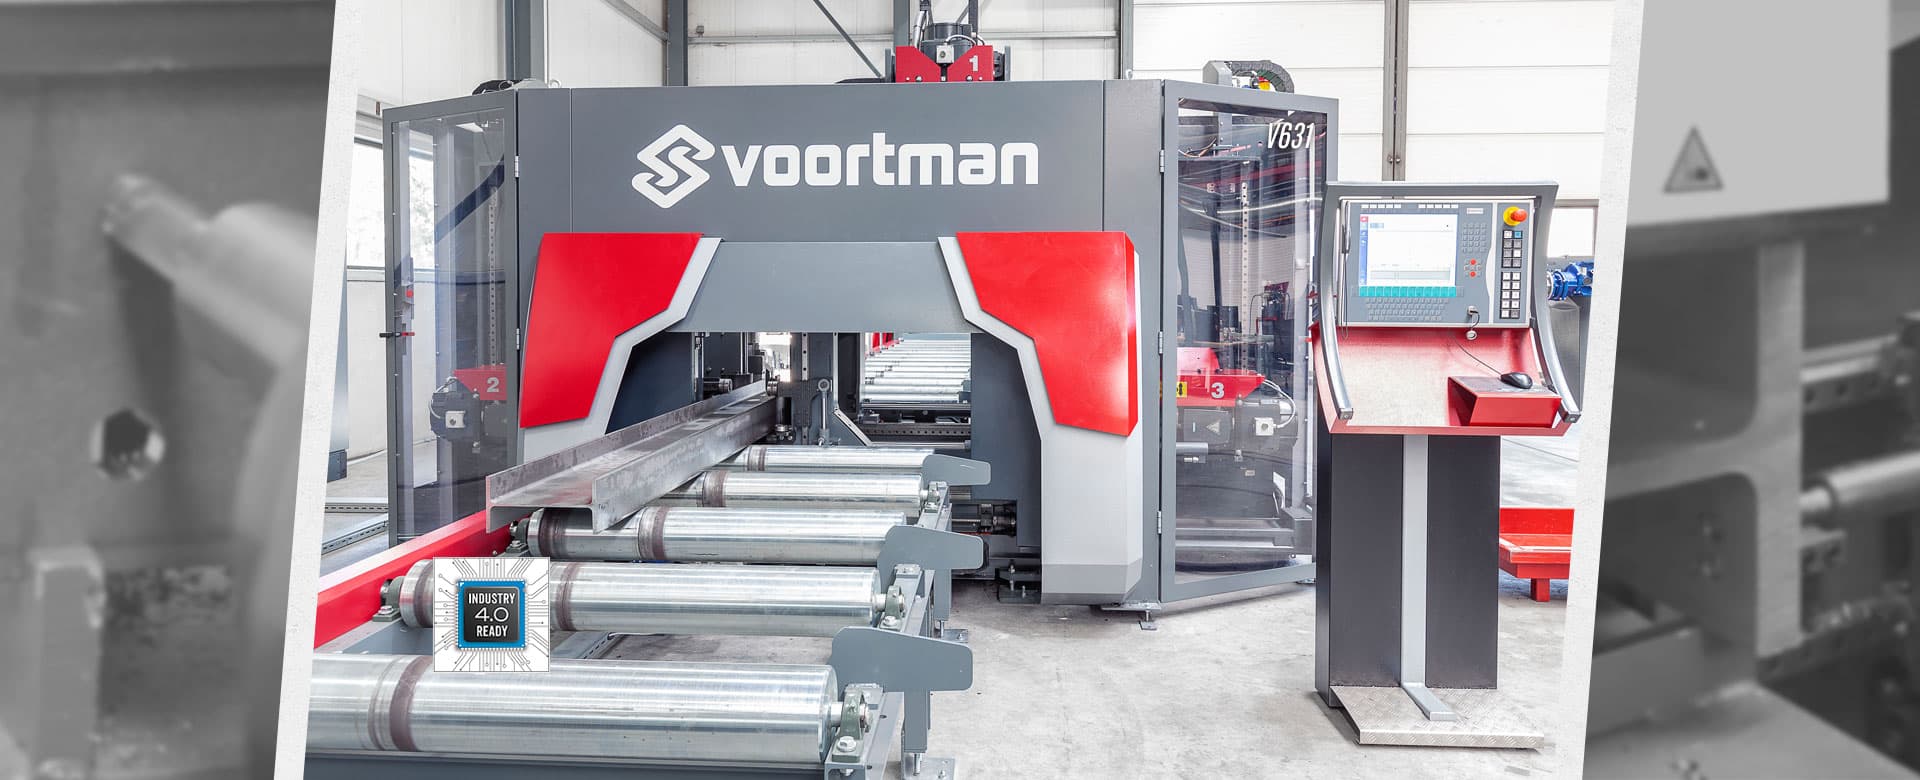 Gulf States Saw & Machine Co. offers the Voortman V631 beam drilling and milling machine.